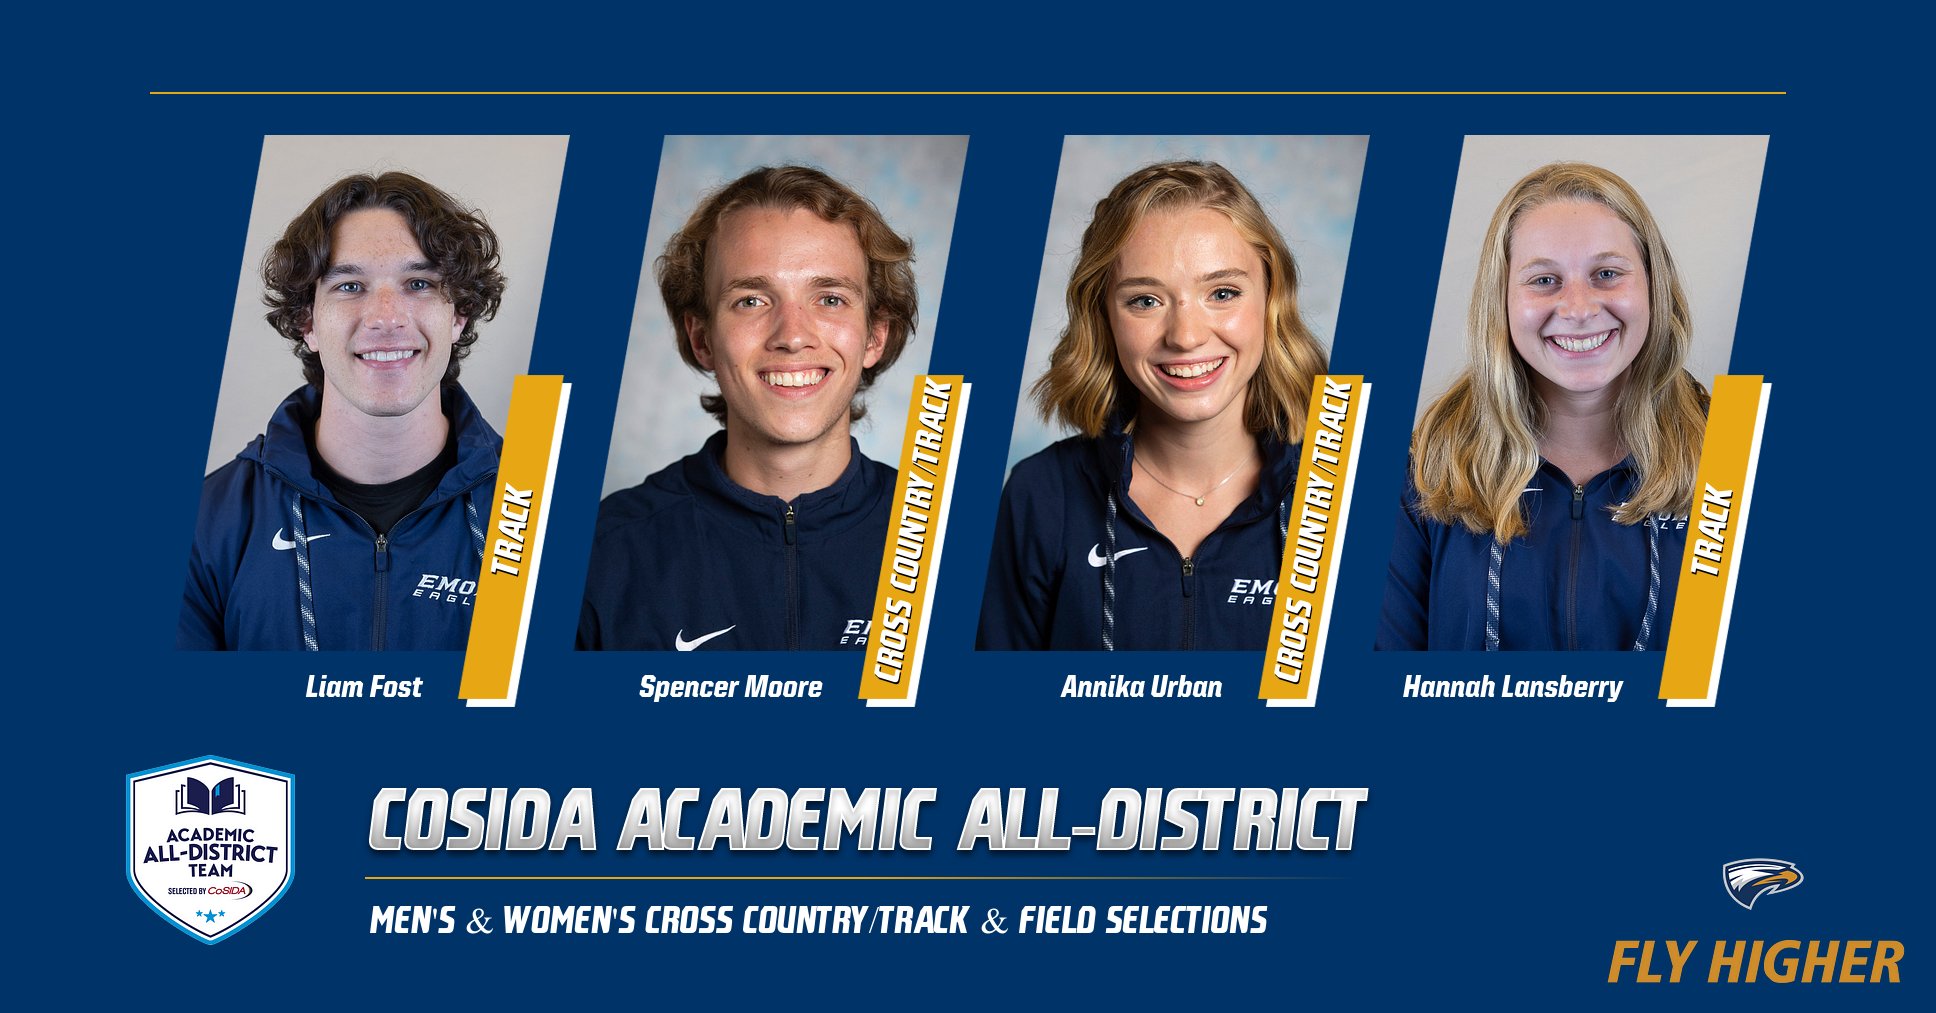 Four Eagles Named to CoSIDA Academic All-District Team for Cross Country/Track & Field